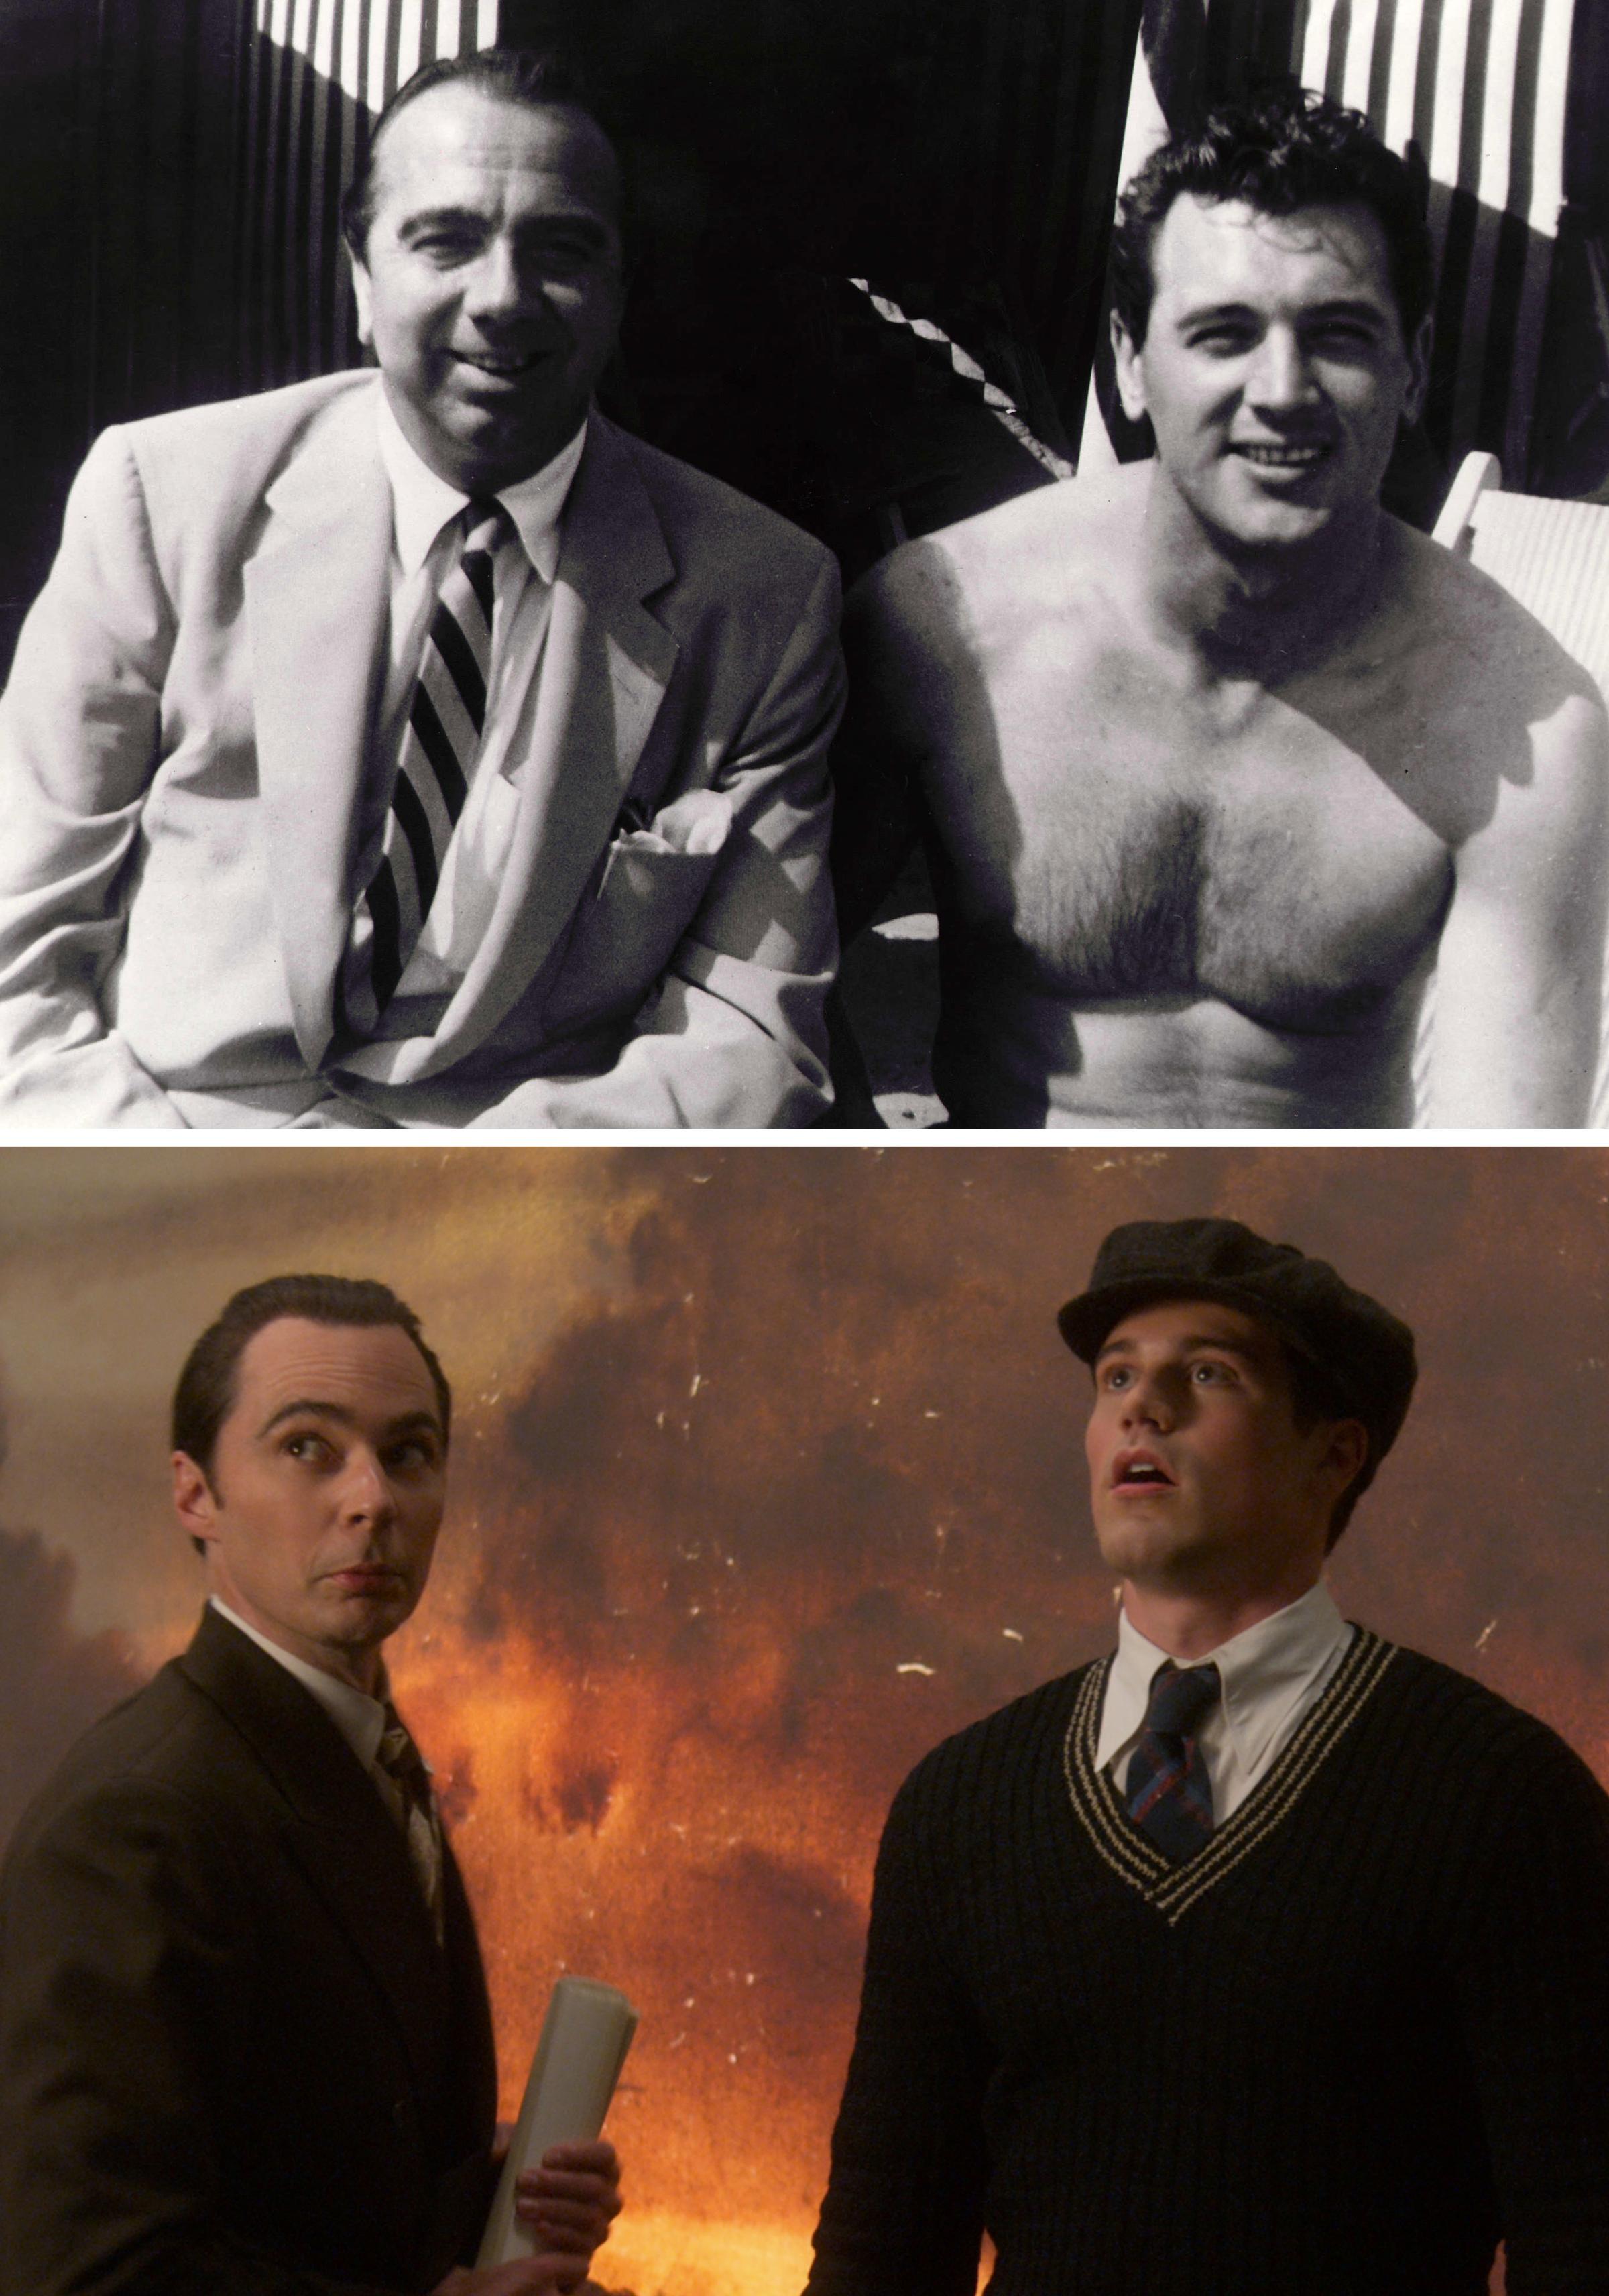 Henry Willson and Rock Hudson; Jim Parsons as Henry Willson and Jake Picking as Rock Hudson in 'Hollywood'